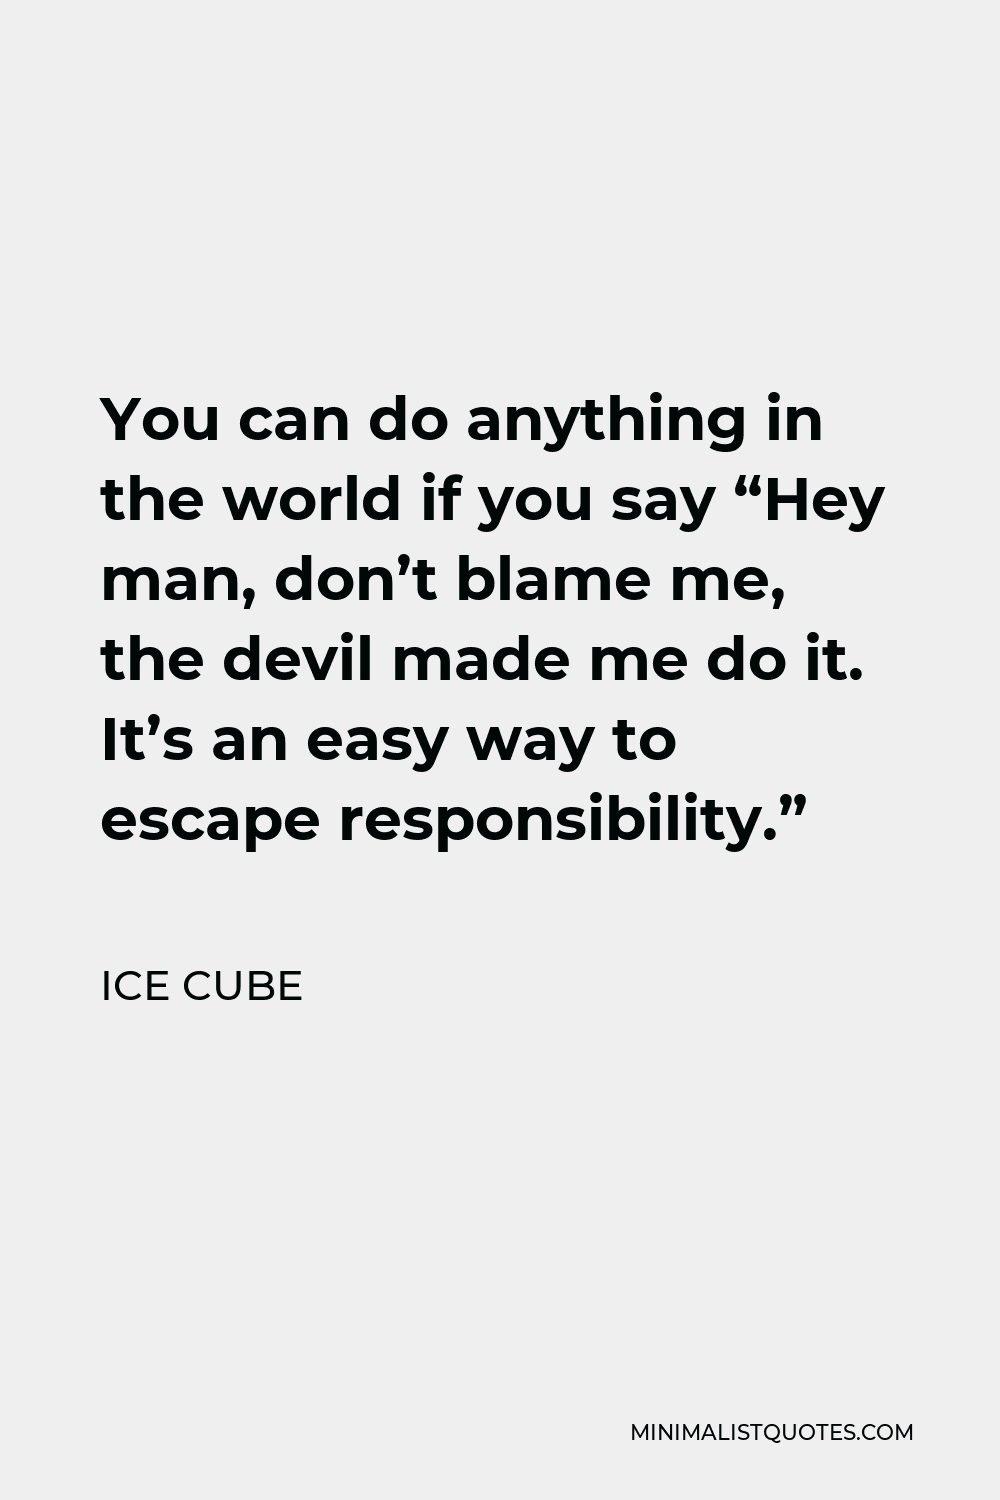 Ice Cube Quote - You can do anything in the world if you say “Hey man, don’t blame me, the devil made me do it. It’s an easy way to escape responsibility.”